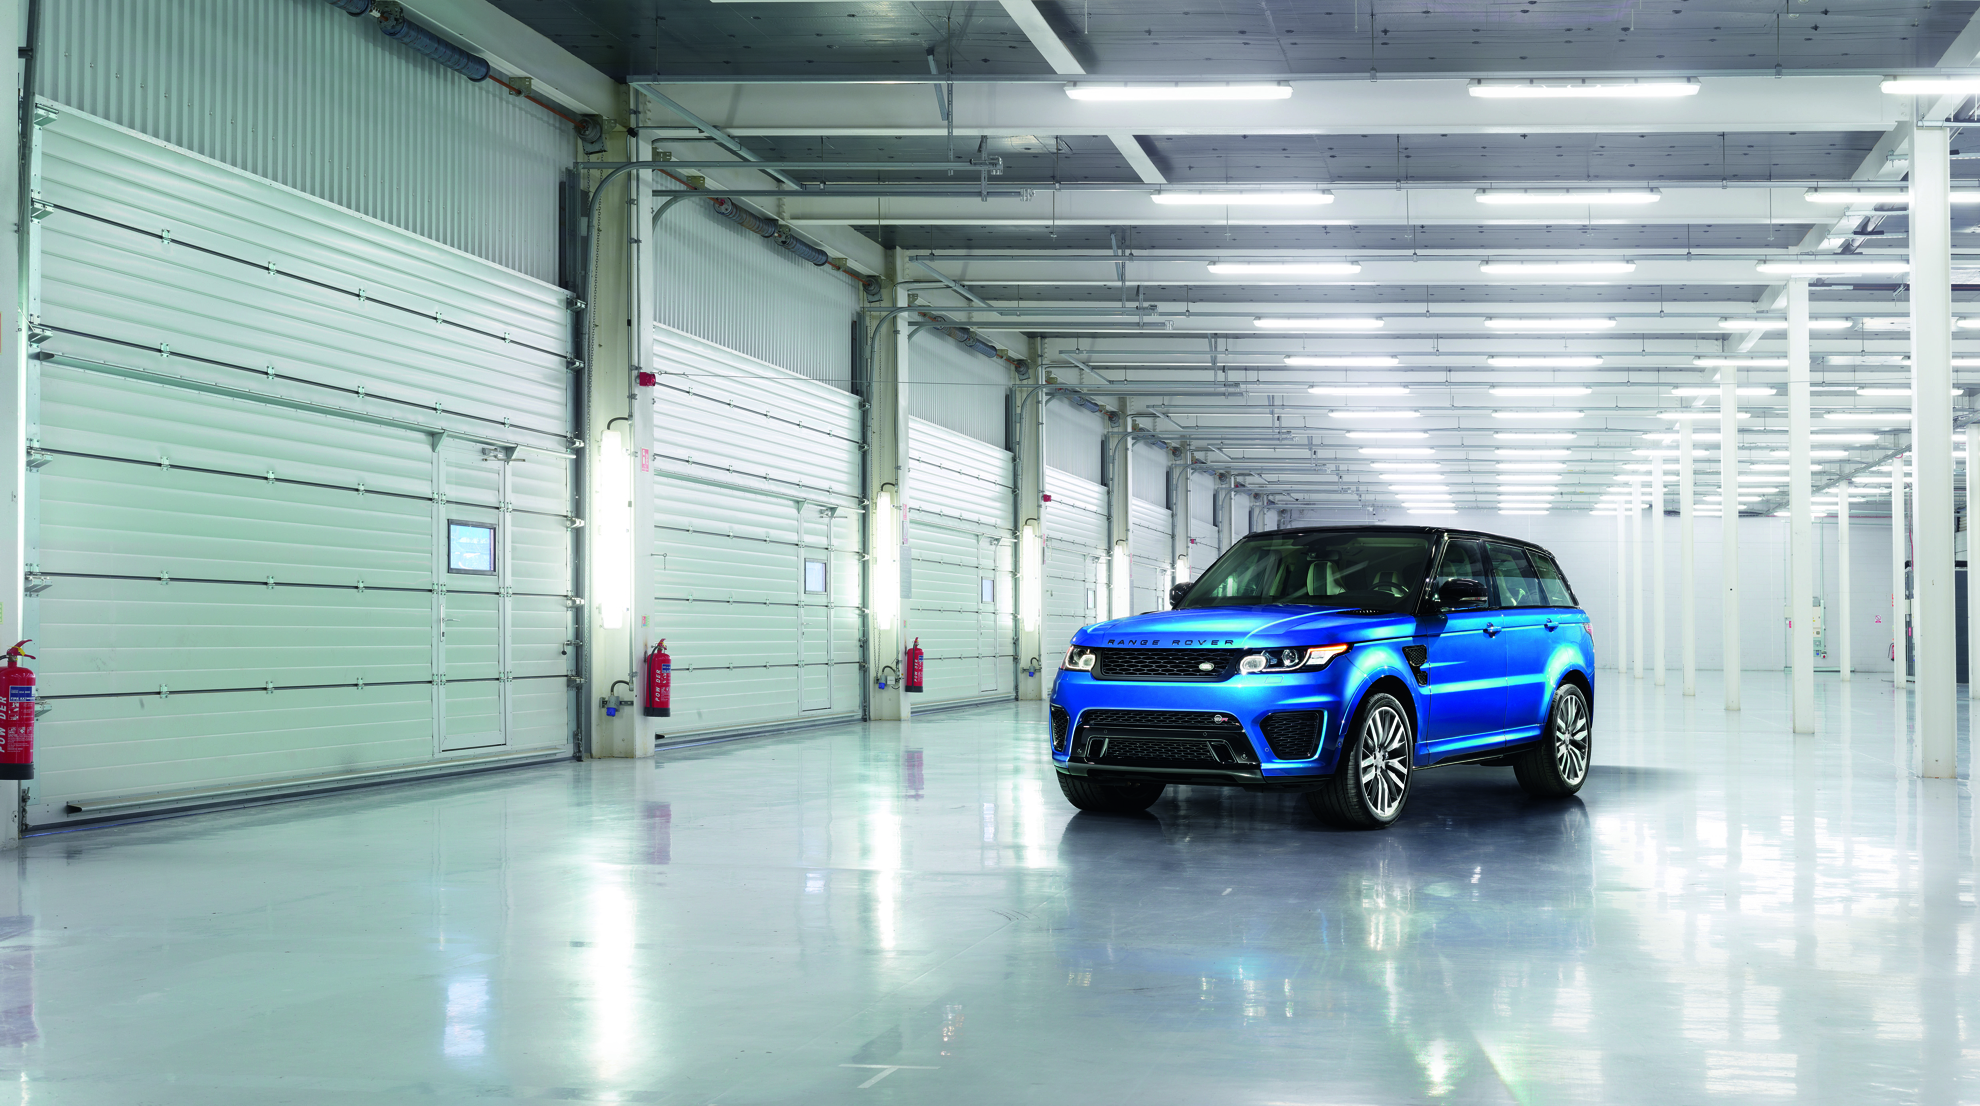 Pebble Beach Debut for New Range Rover Sport SVR: The Fastest, Most Powerful Land Rover Ever